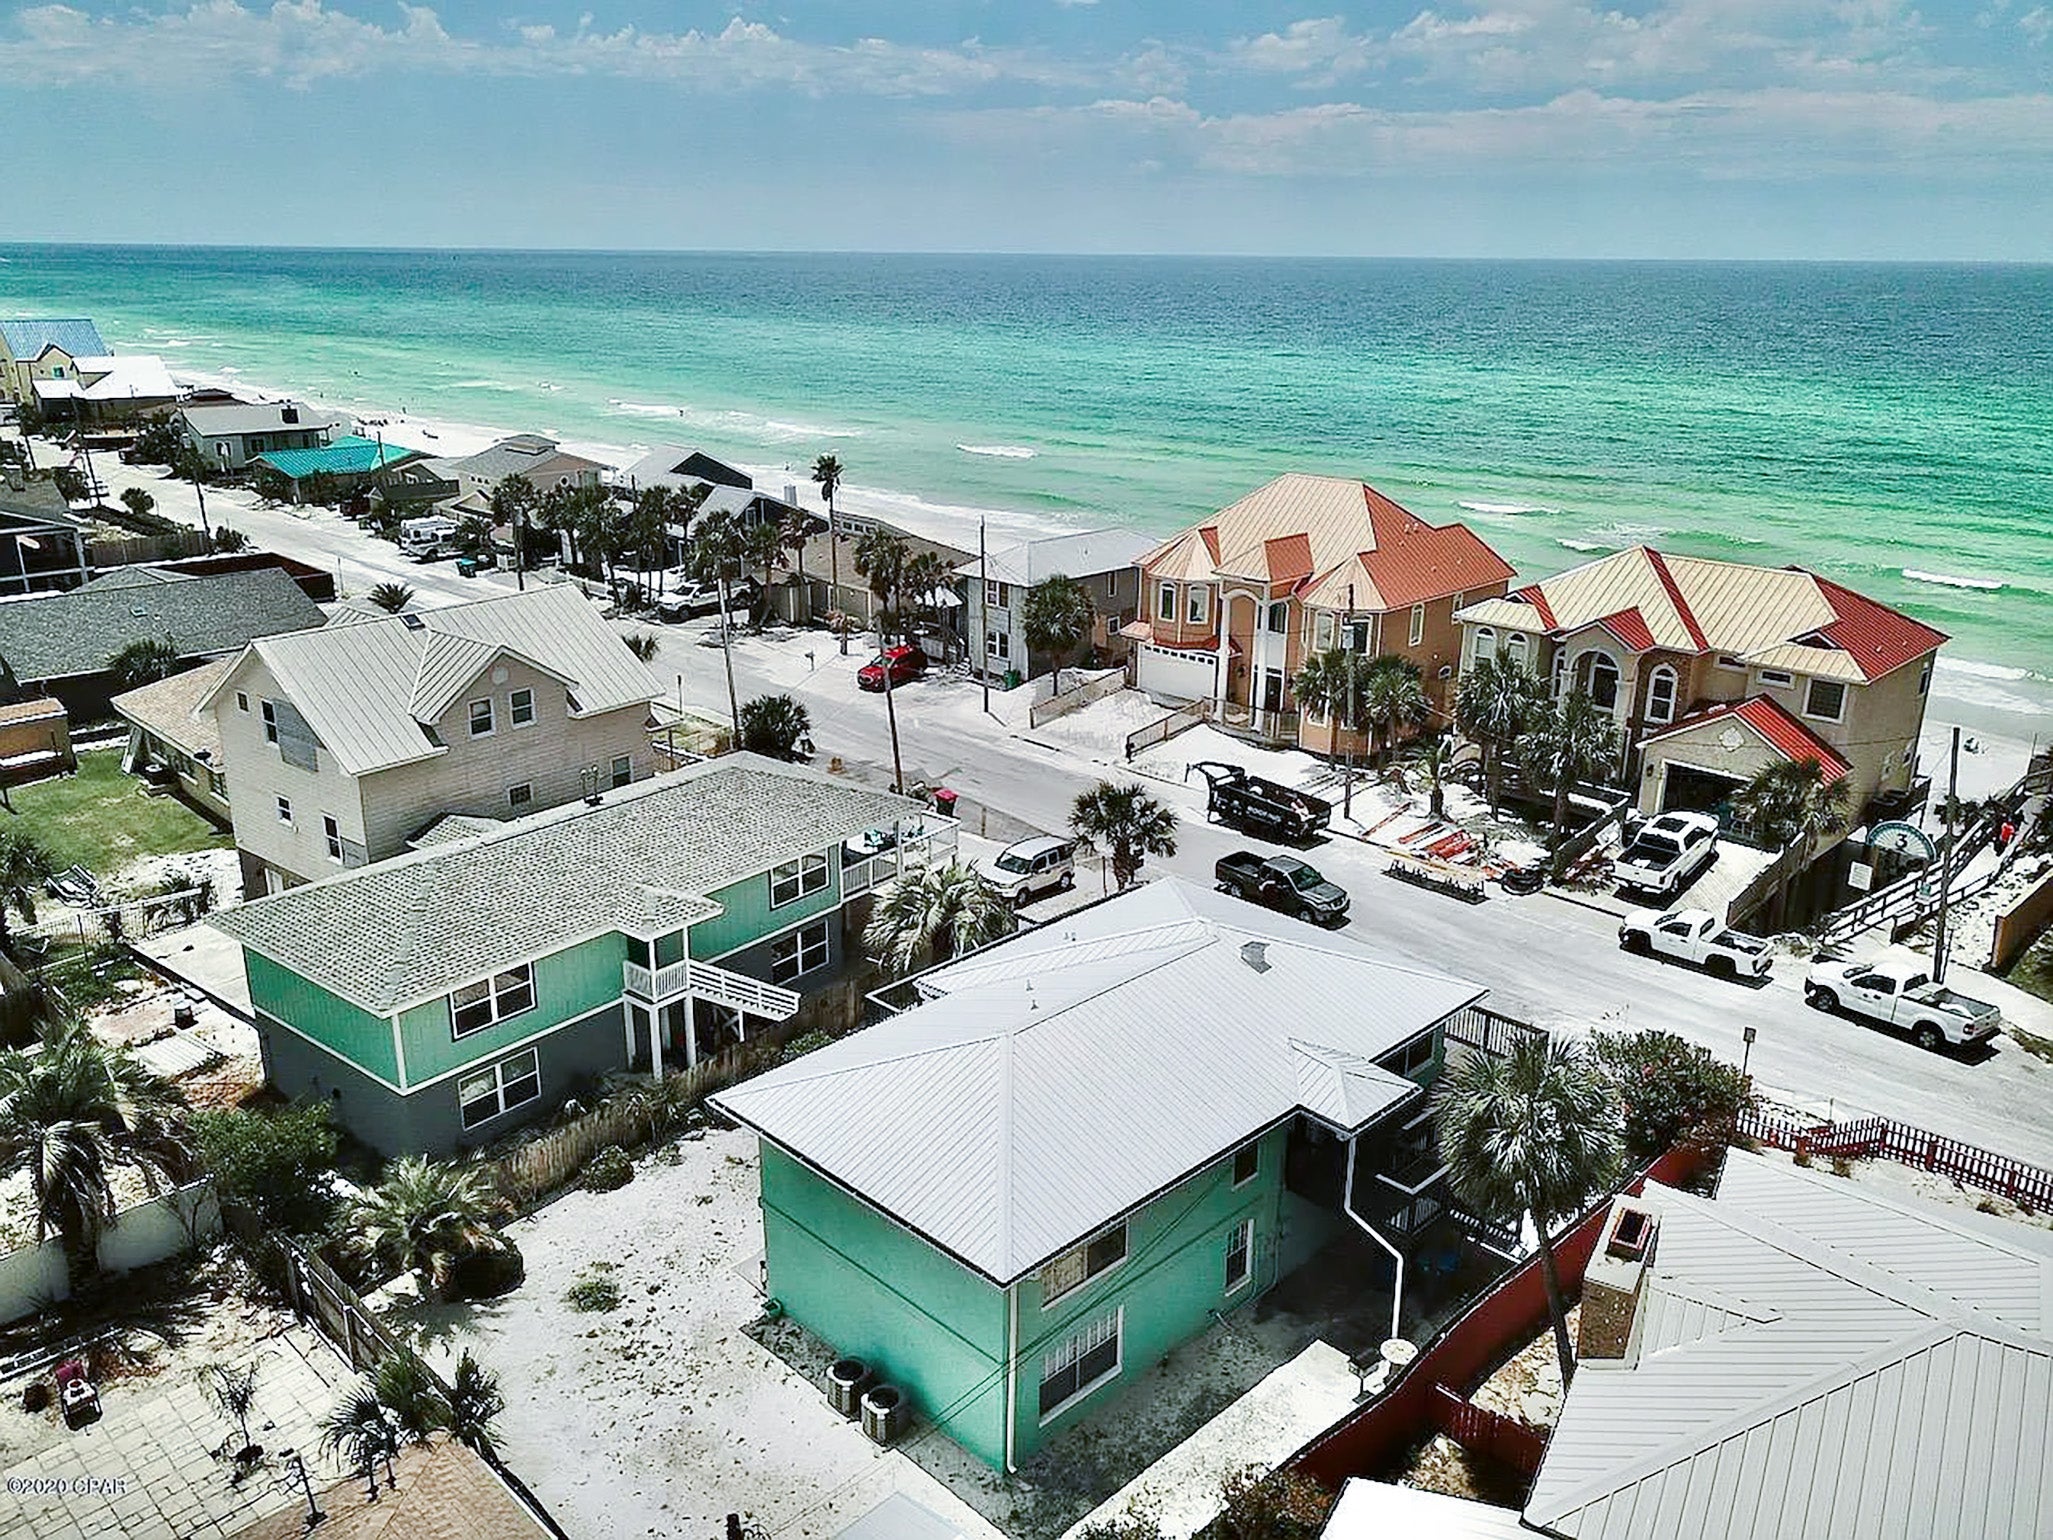 Aerial view of The Sand Dollar A